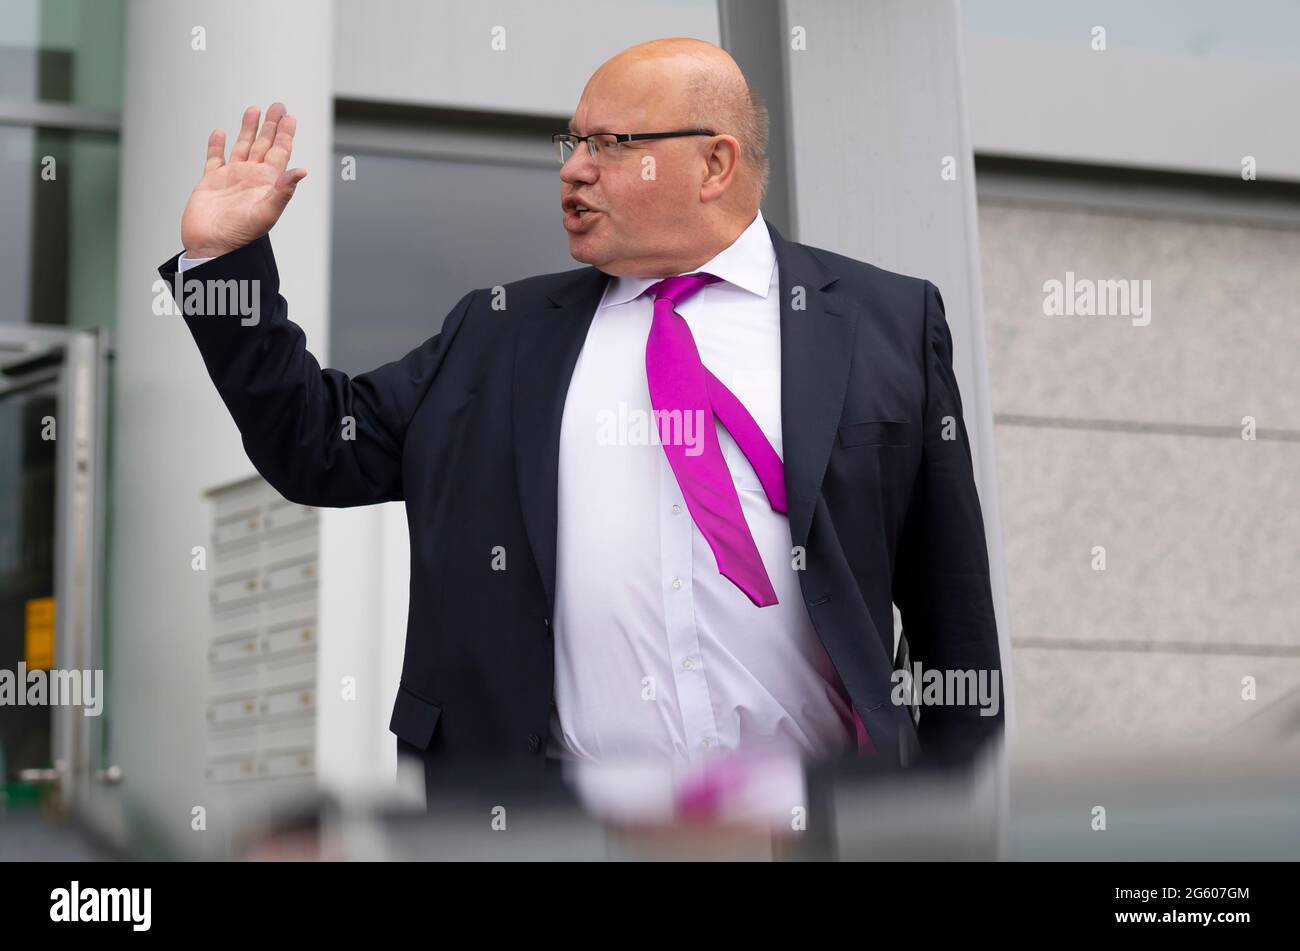 Dresden, Germany. 01st July, 2021. Federal Minister of Economics Peter Altmaier (CDU) waves during a visit to Infineon Technologies. Altmaier visits Infineon and Globalfoundries to discuss microelectronics. Credit: Matthias Rietschel/dpa-Zentralbild/dpa/Alamy Live News Stock Photo